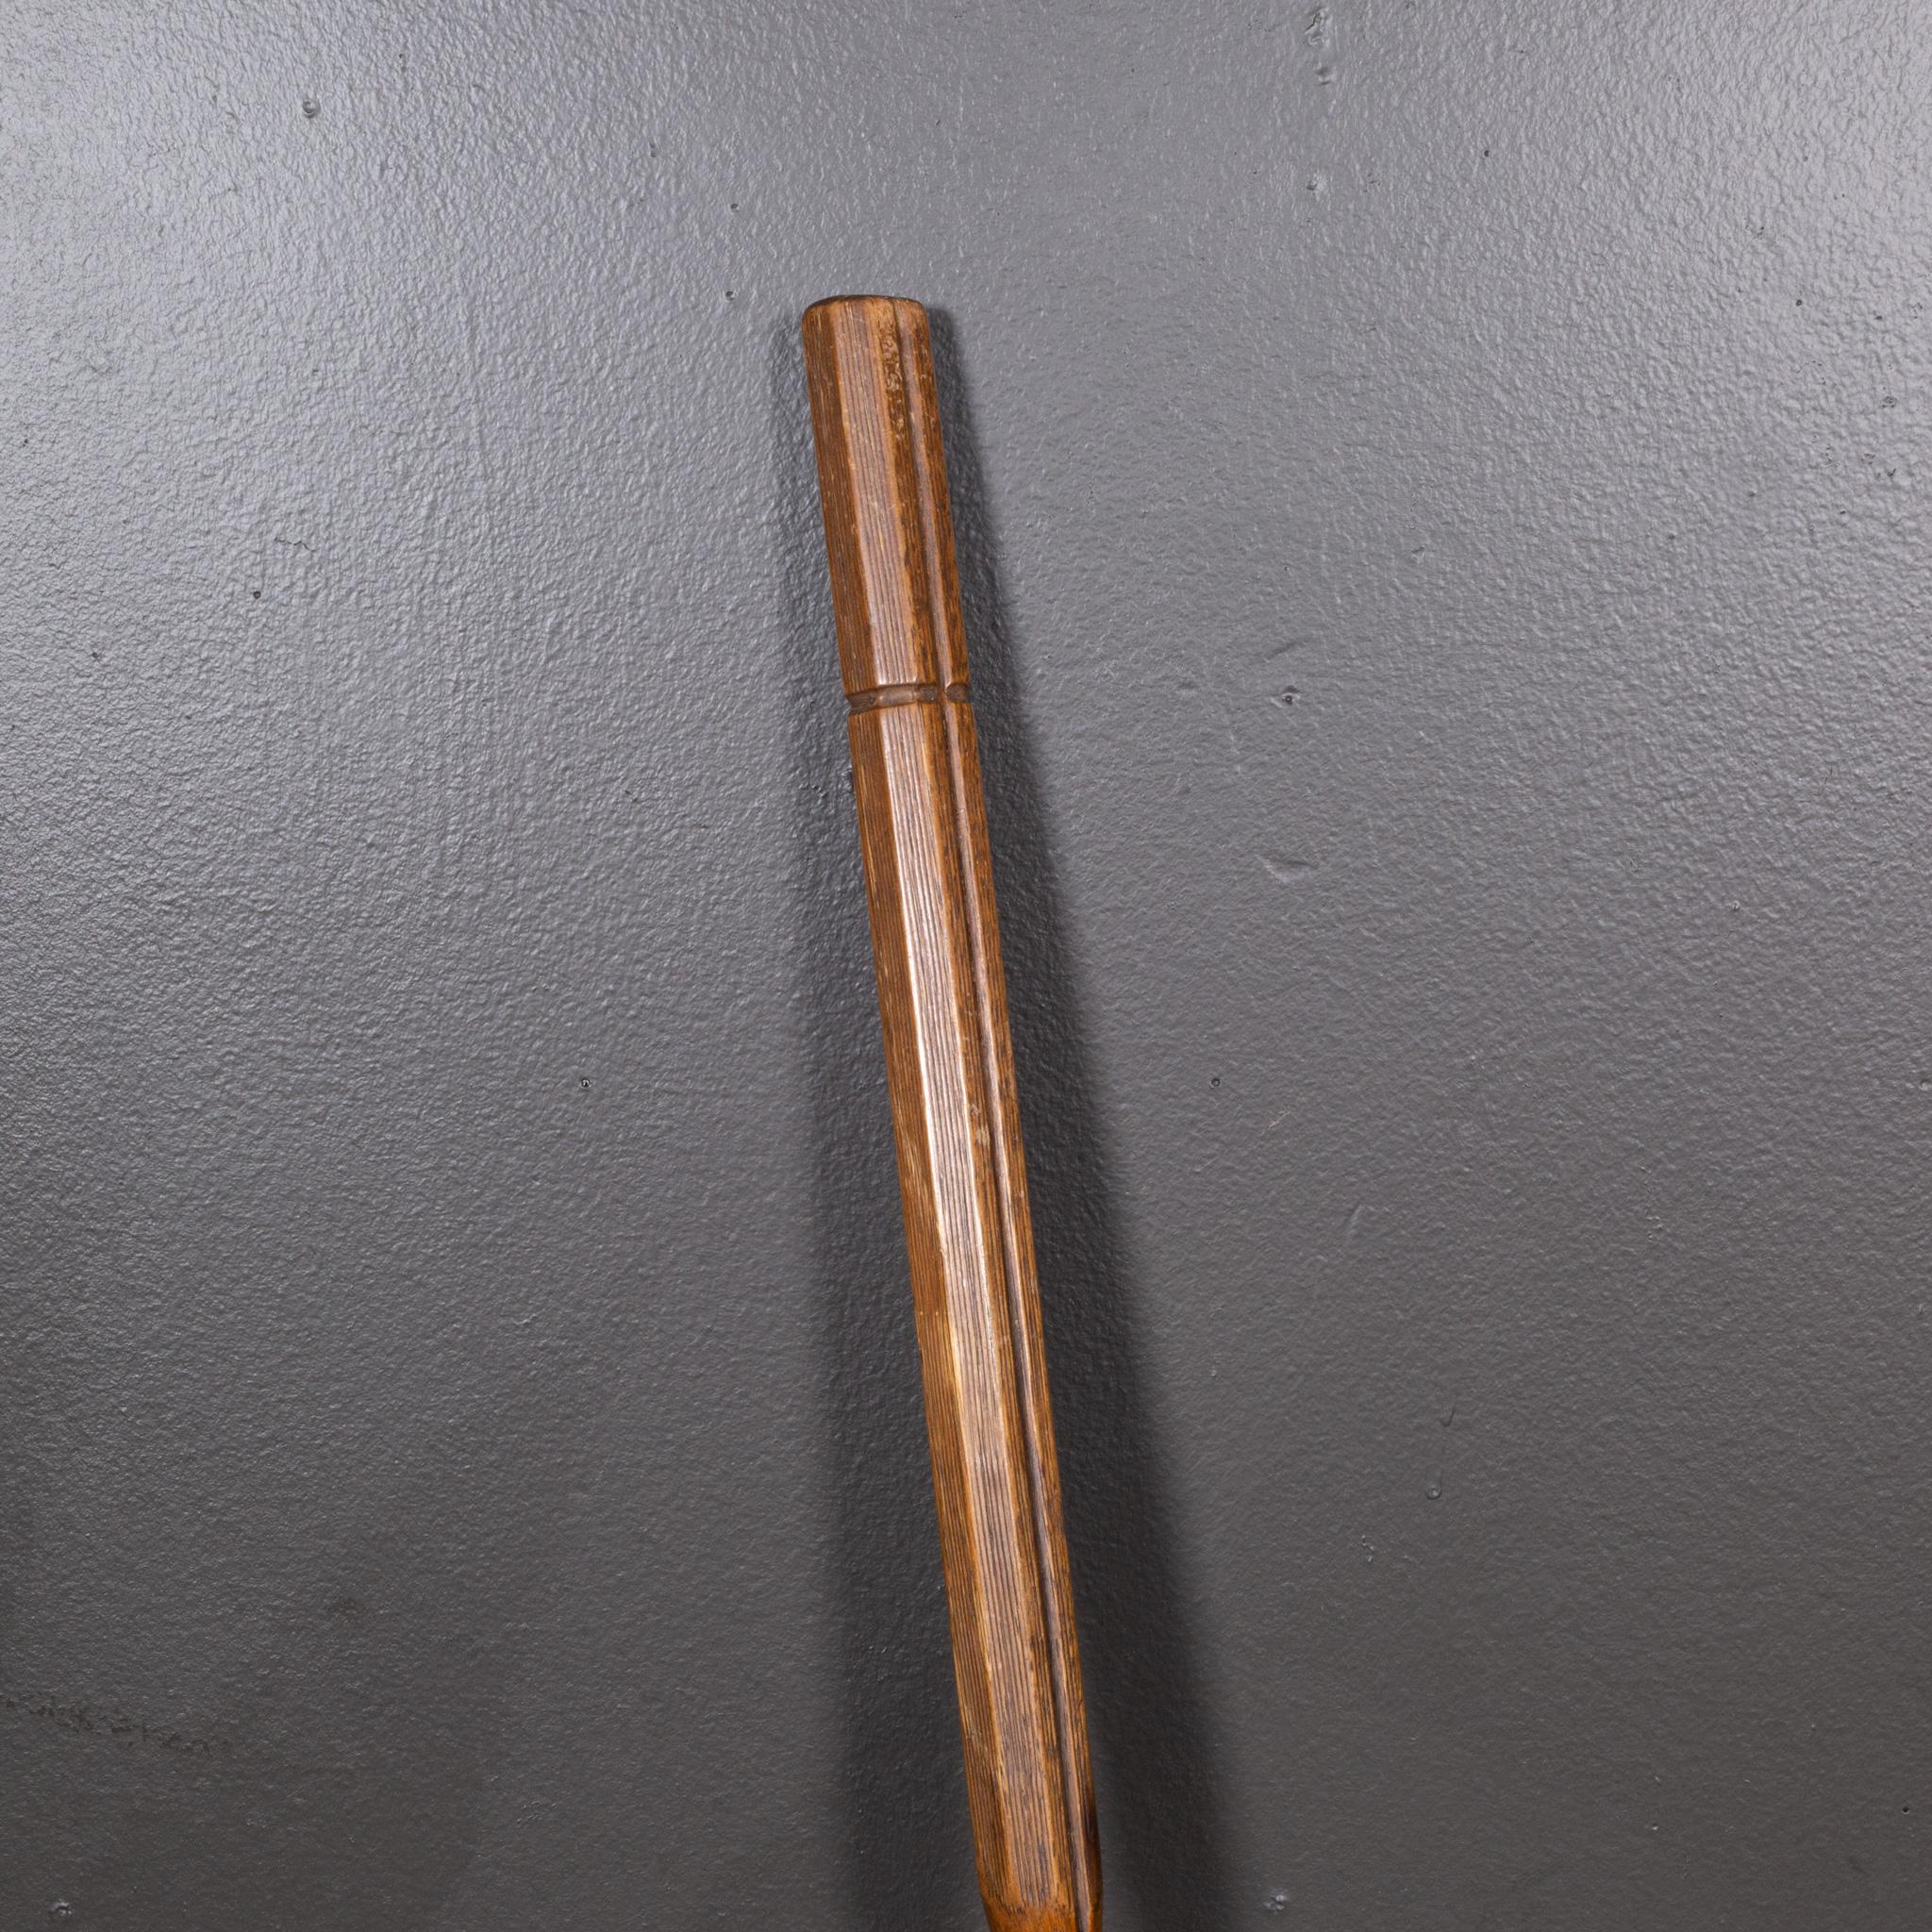 Early 20th c. Engraved Croquet Mallet c.1920 1